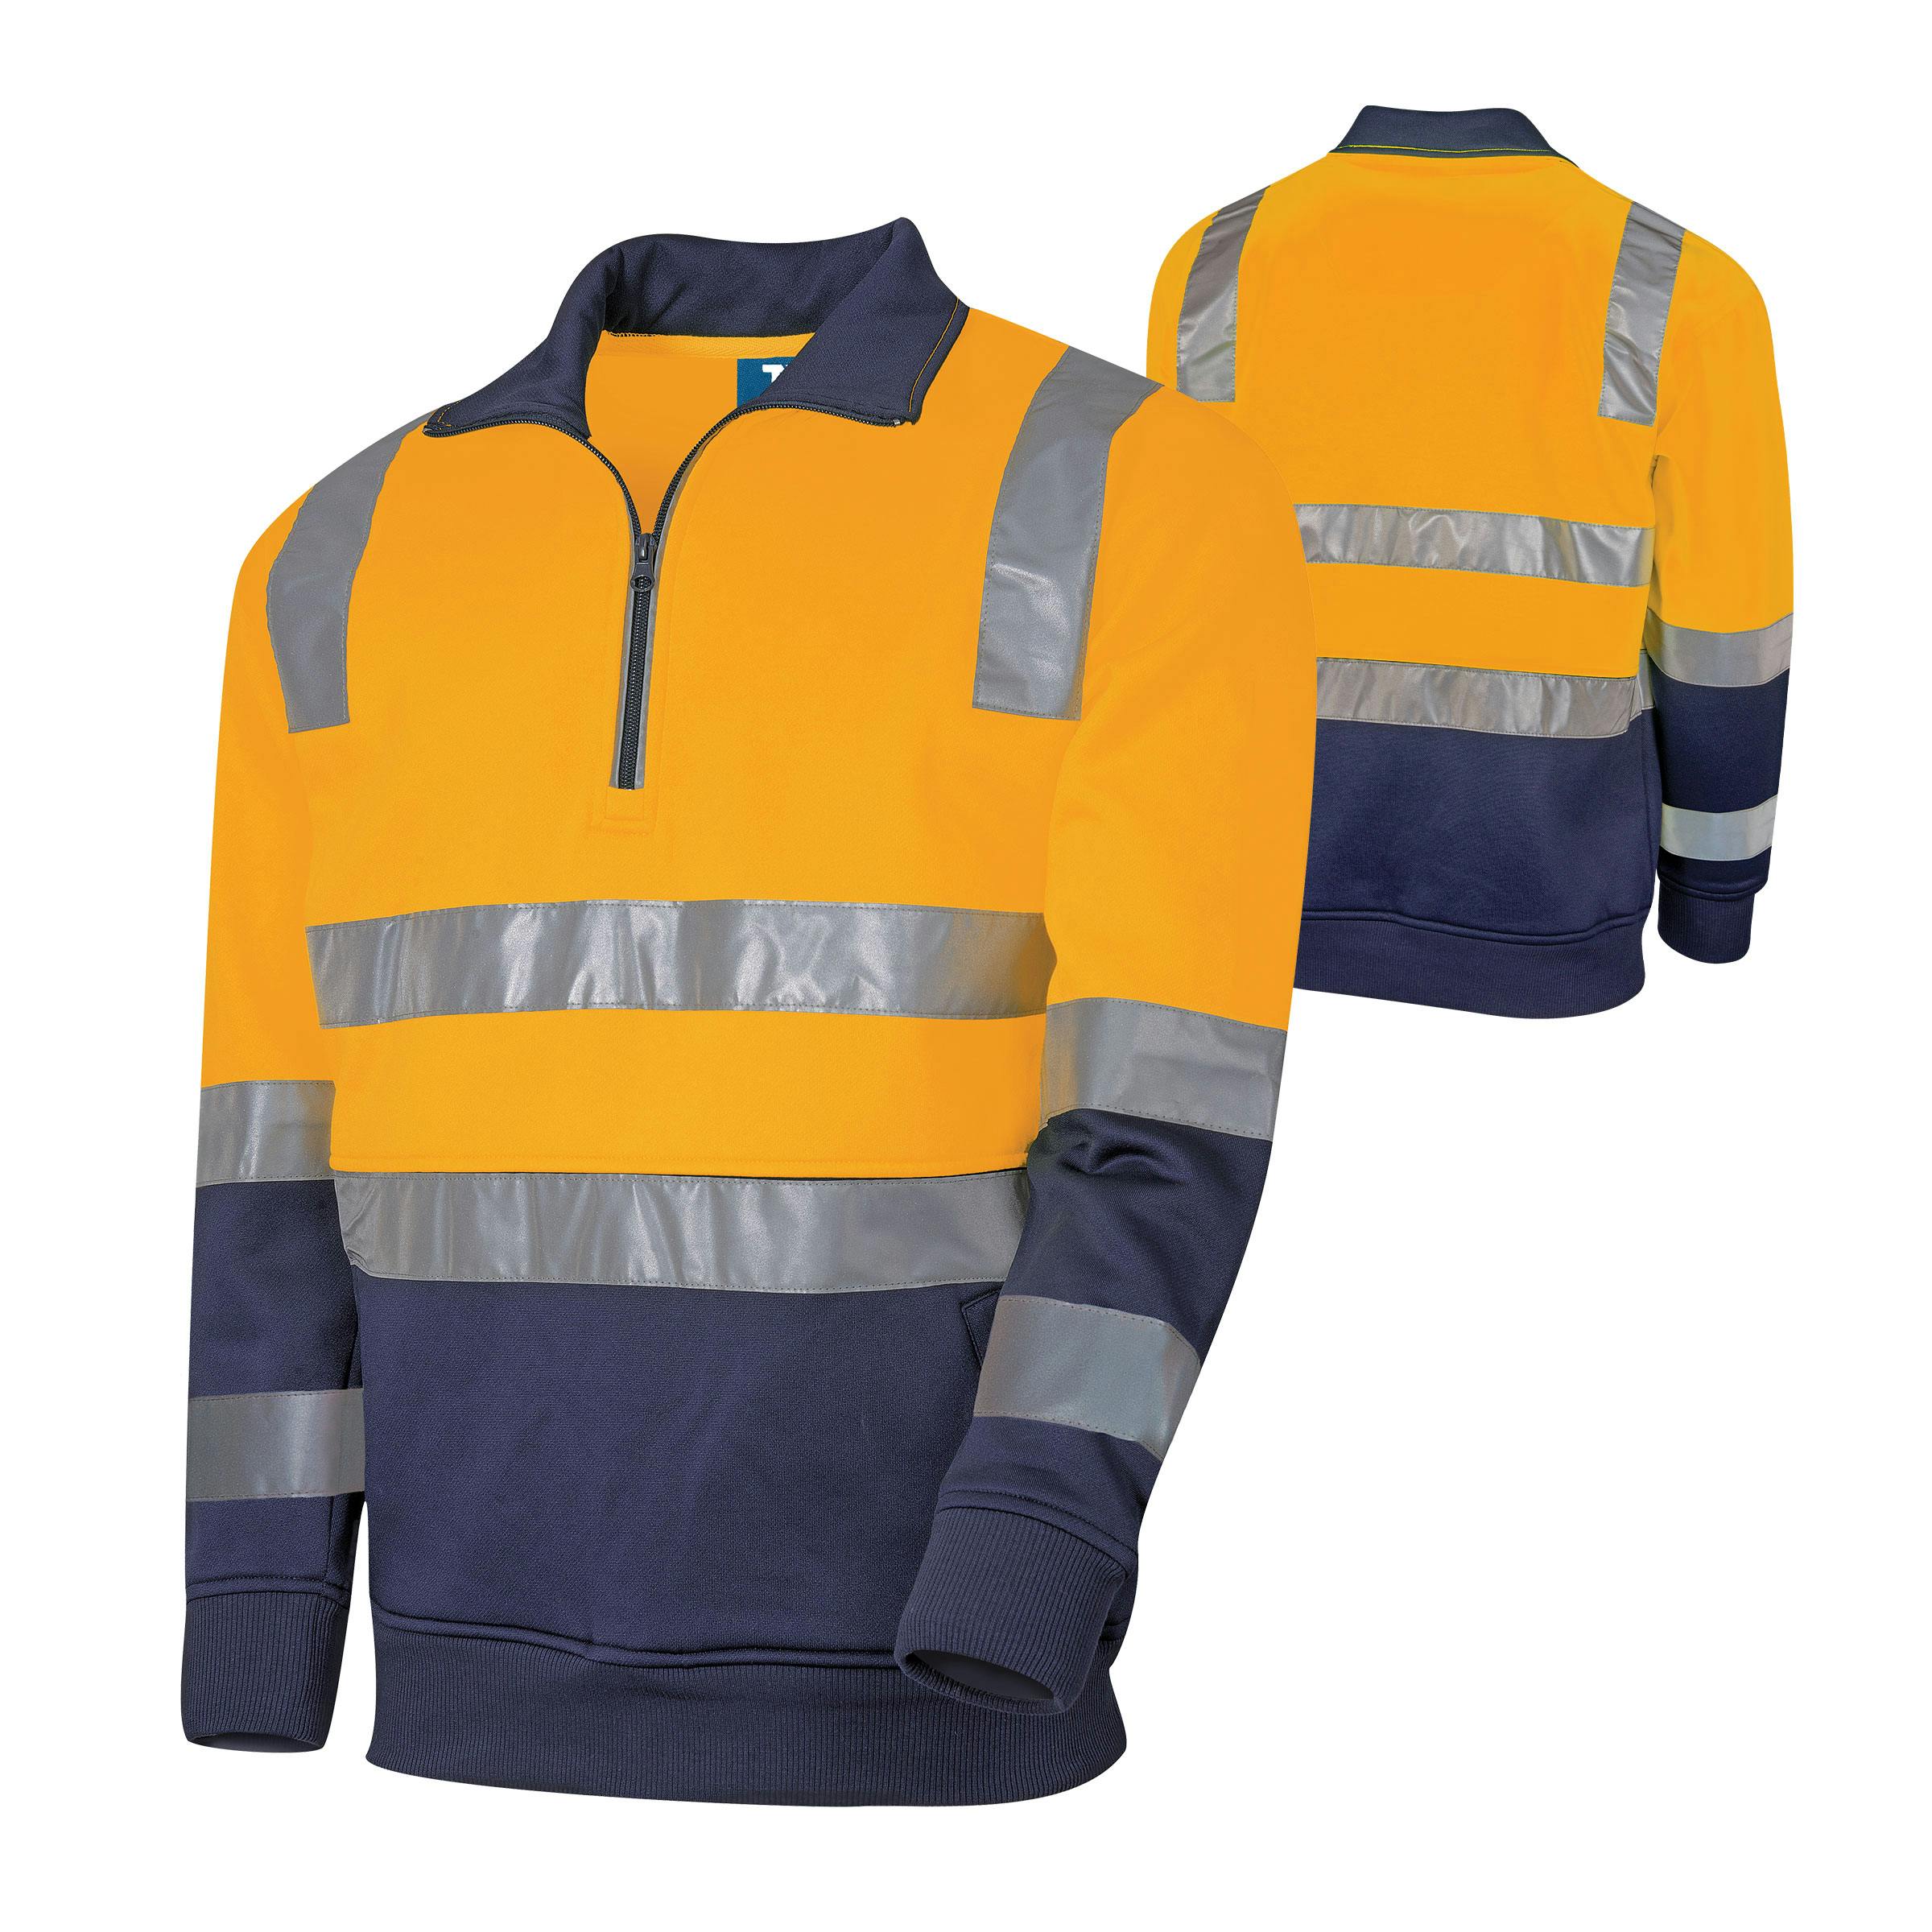 TRu Workwear Jumper 2 Tone 1/4 Zip Polyester Fleece With Tru Reflective Tape (VIC) 2 Hoop On Body, Arms And Strip Over Shoulders Spo/Nvy